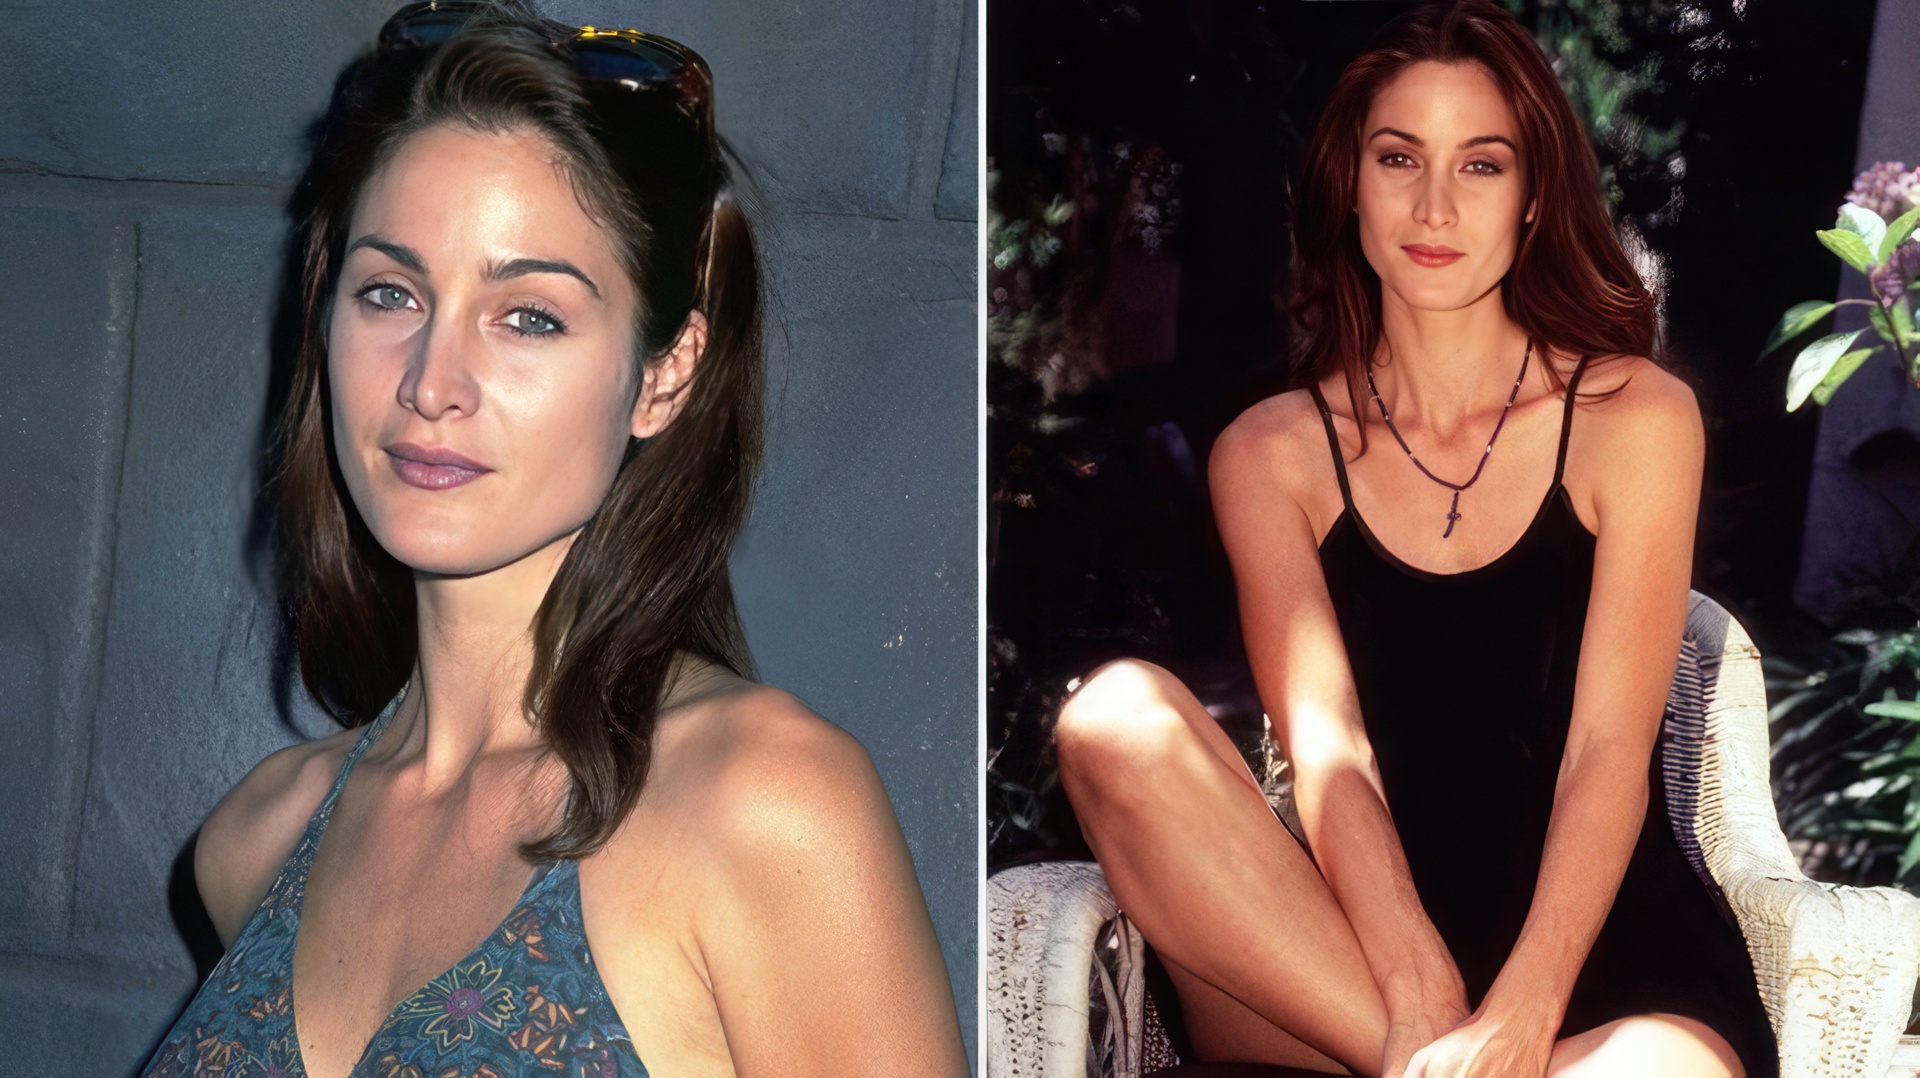 Carrie-Anne Moss in her youth